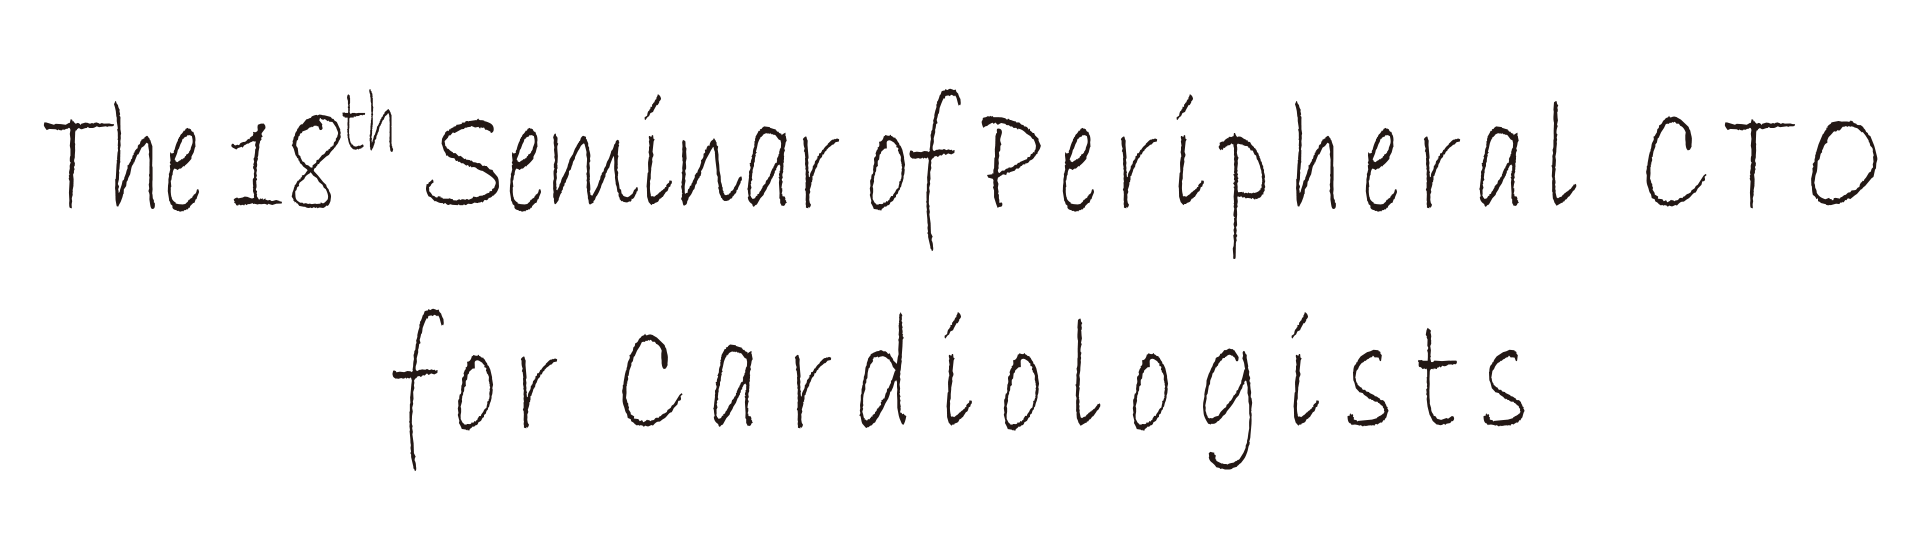 The 18th Seminar of Peripheral CTO for Cardiologists